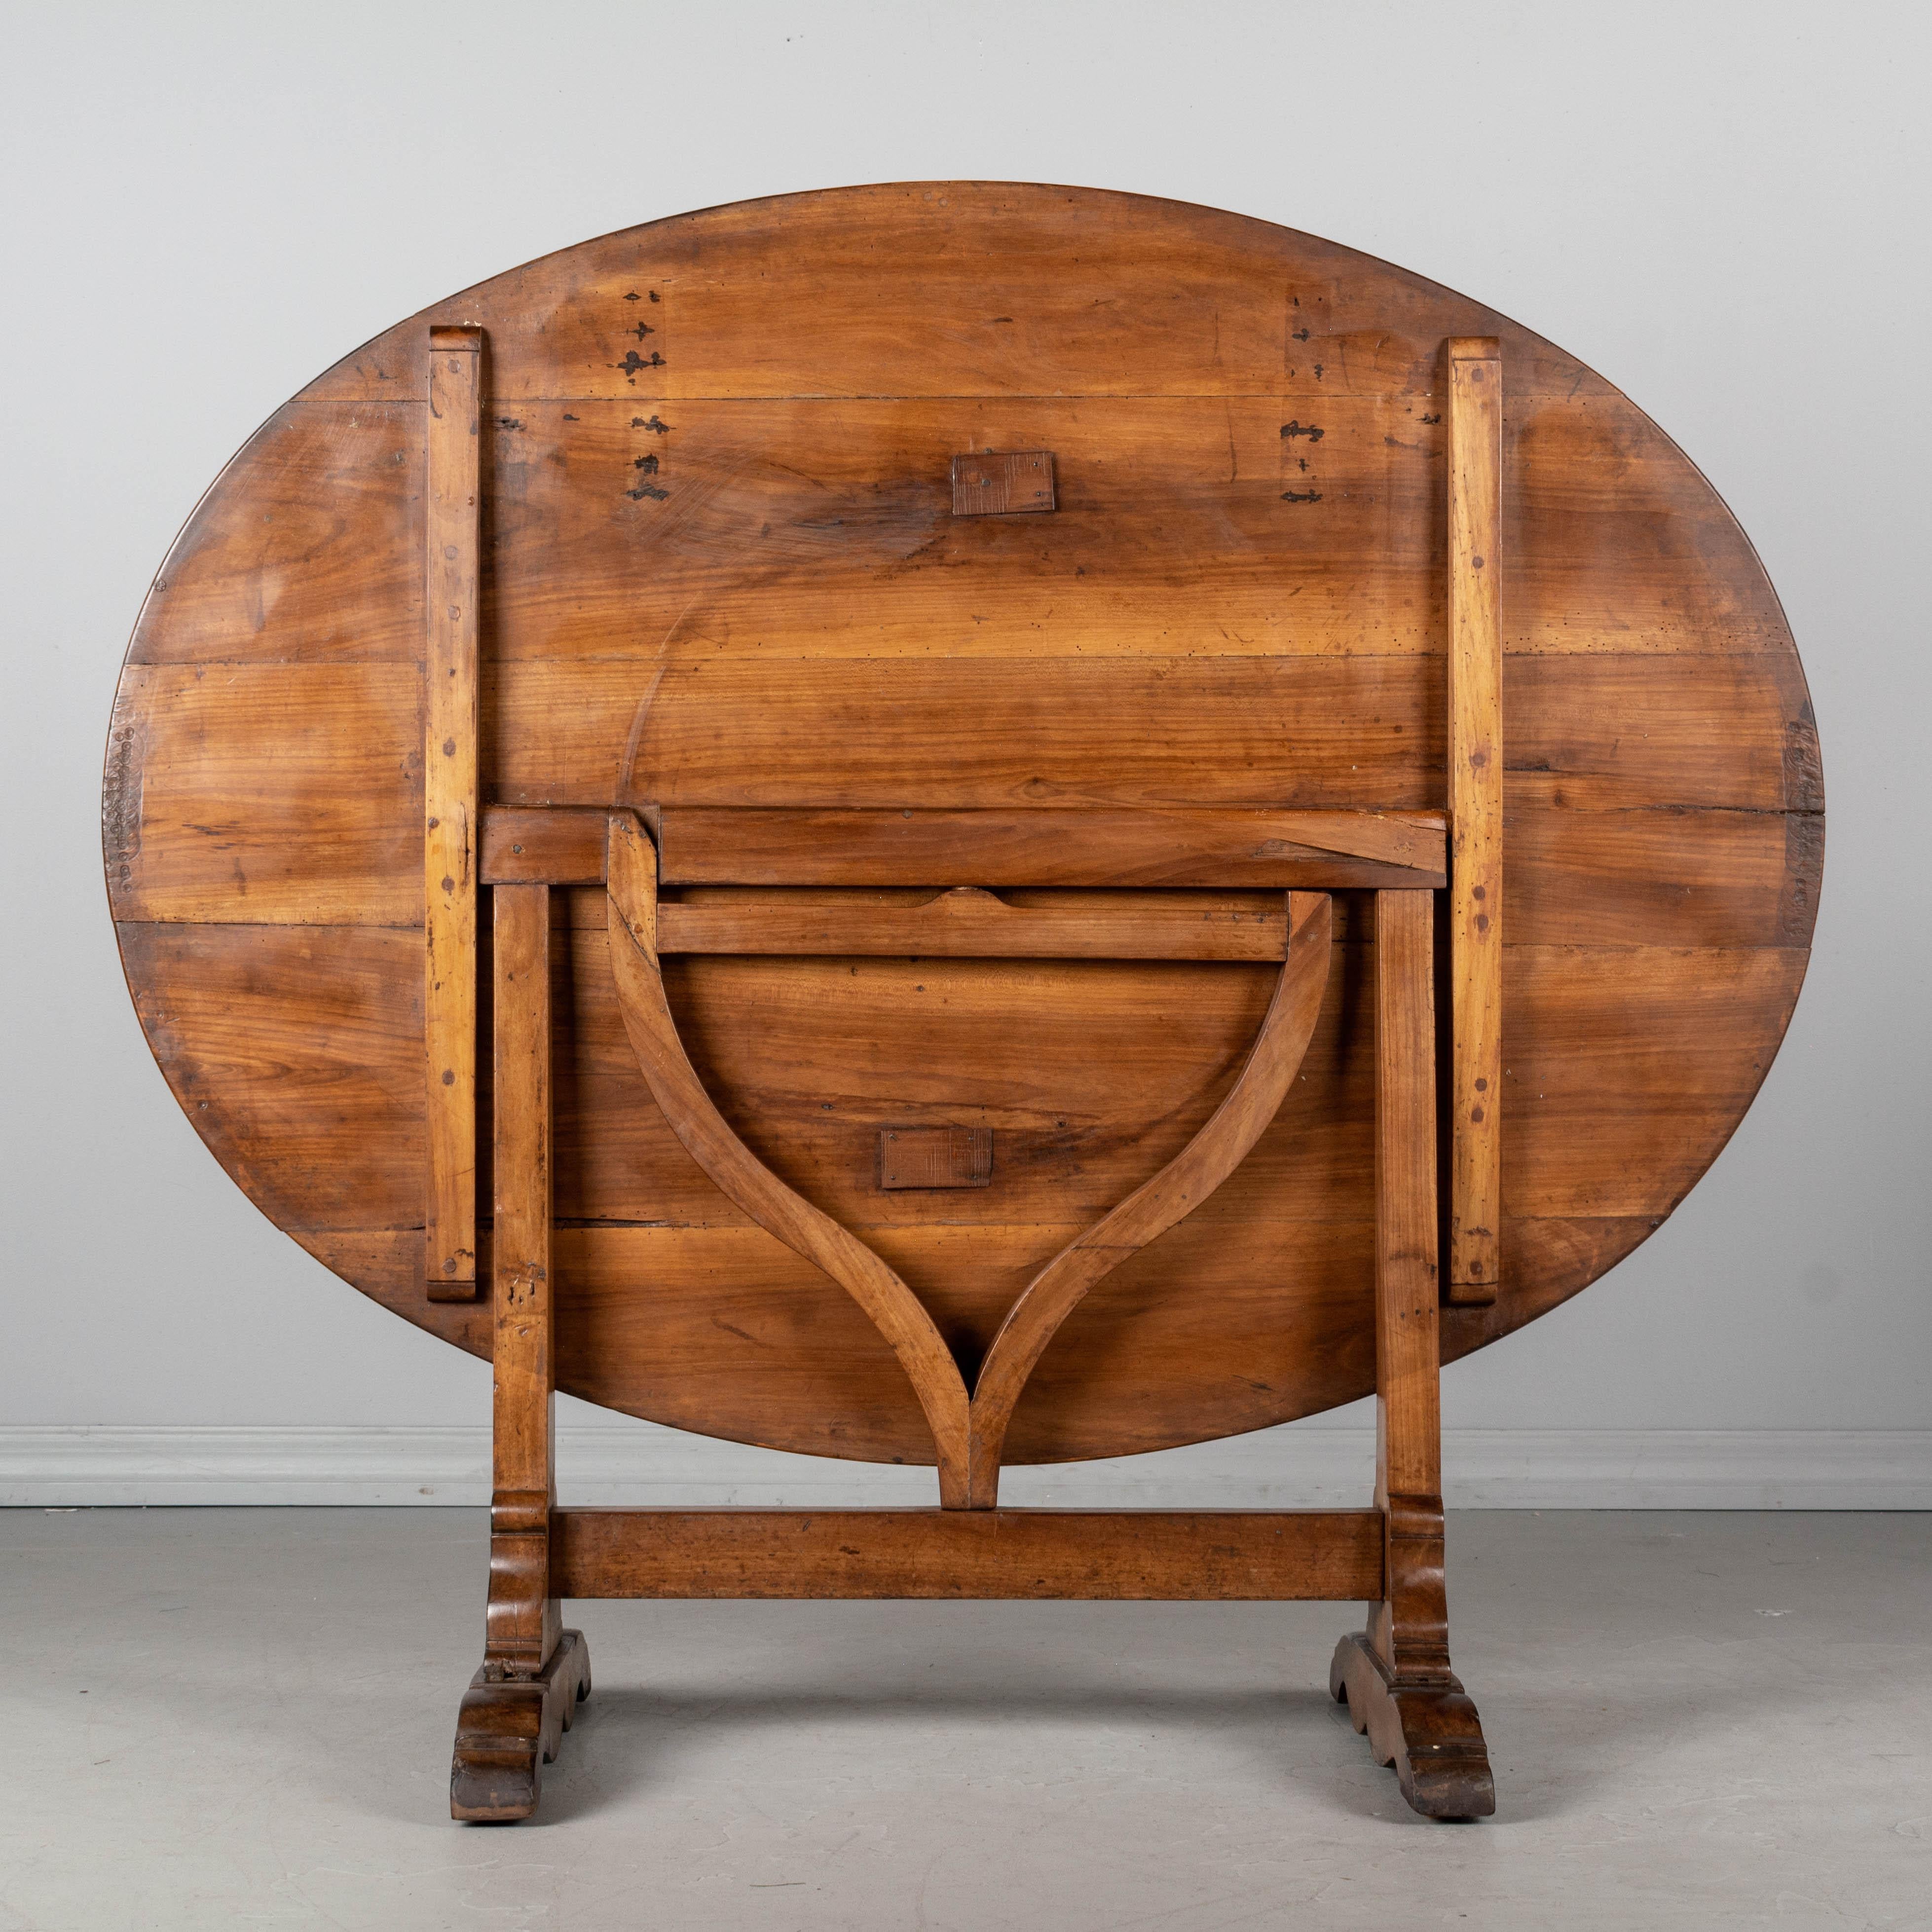 Hand-Crafted French Oval Wine Tasting or Tilt-Top Table